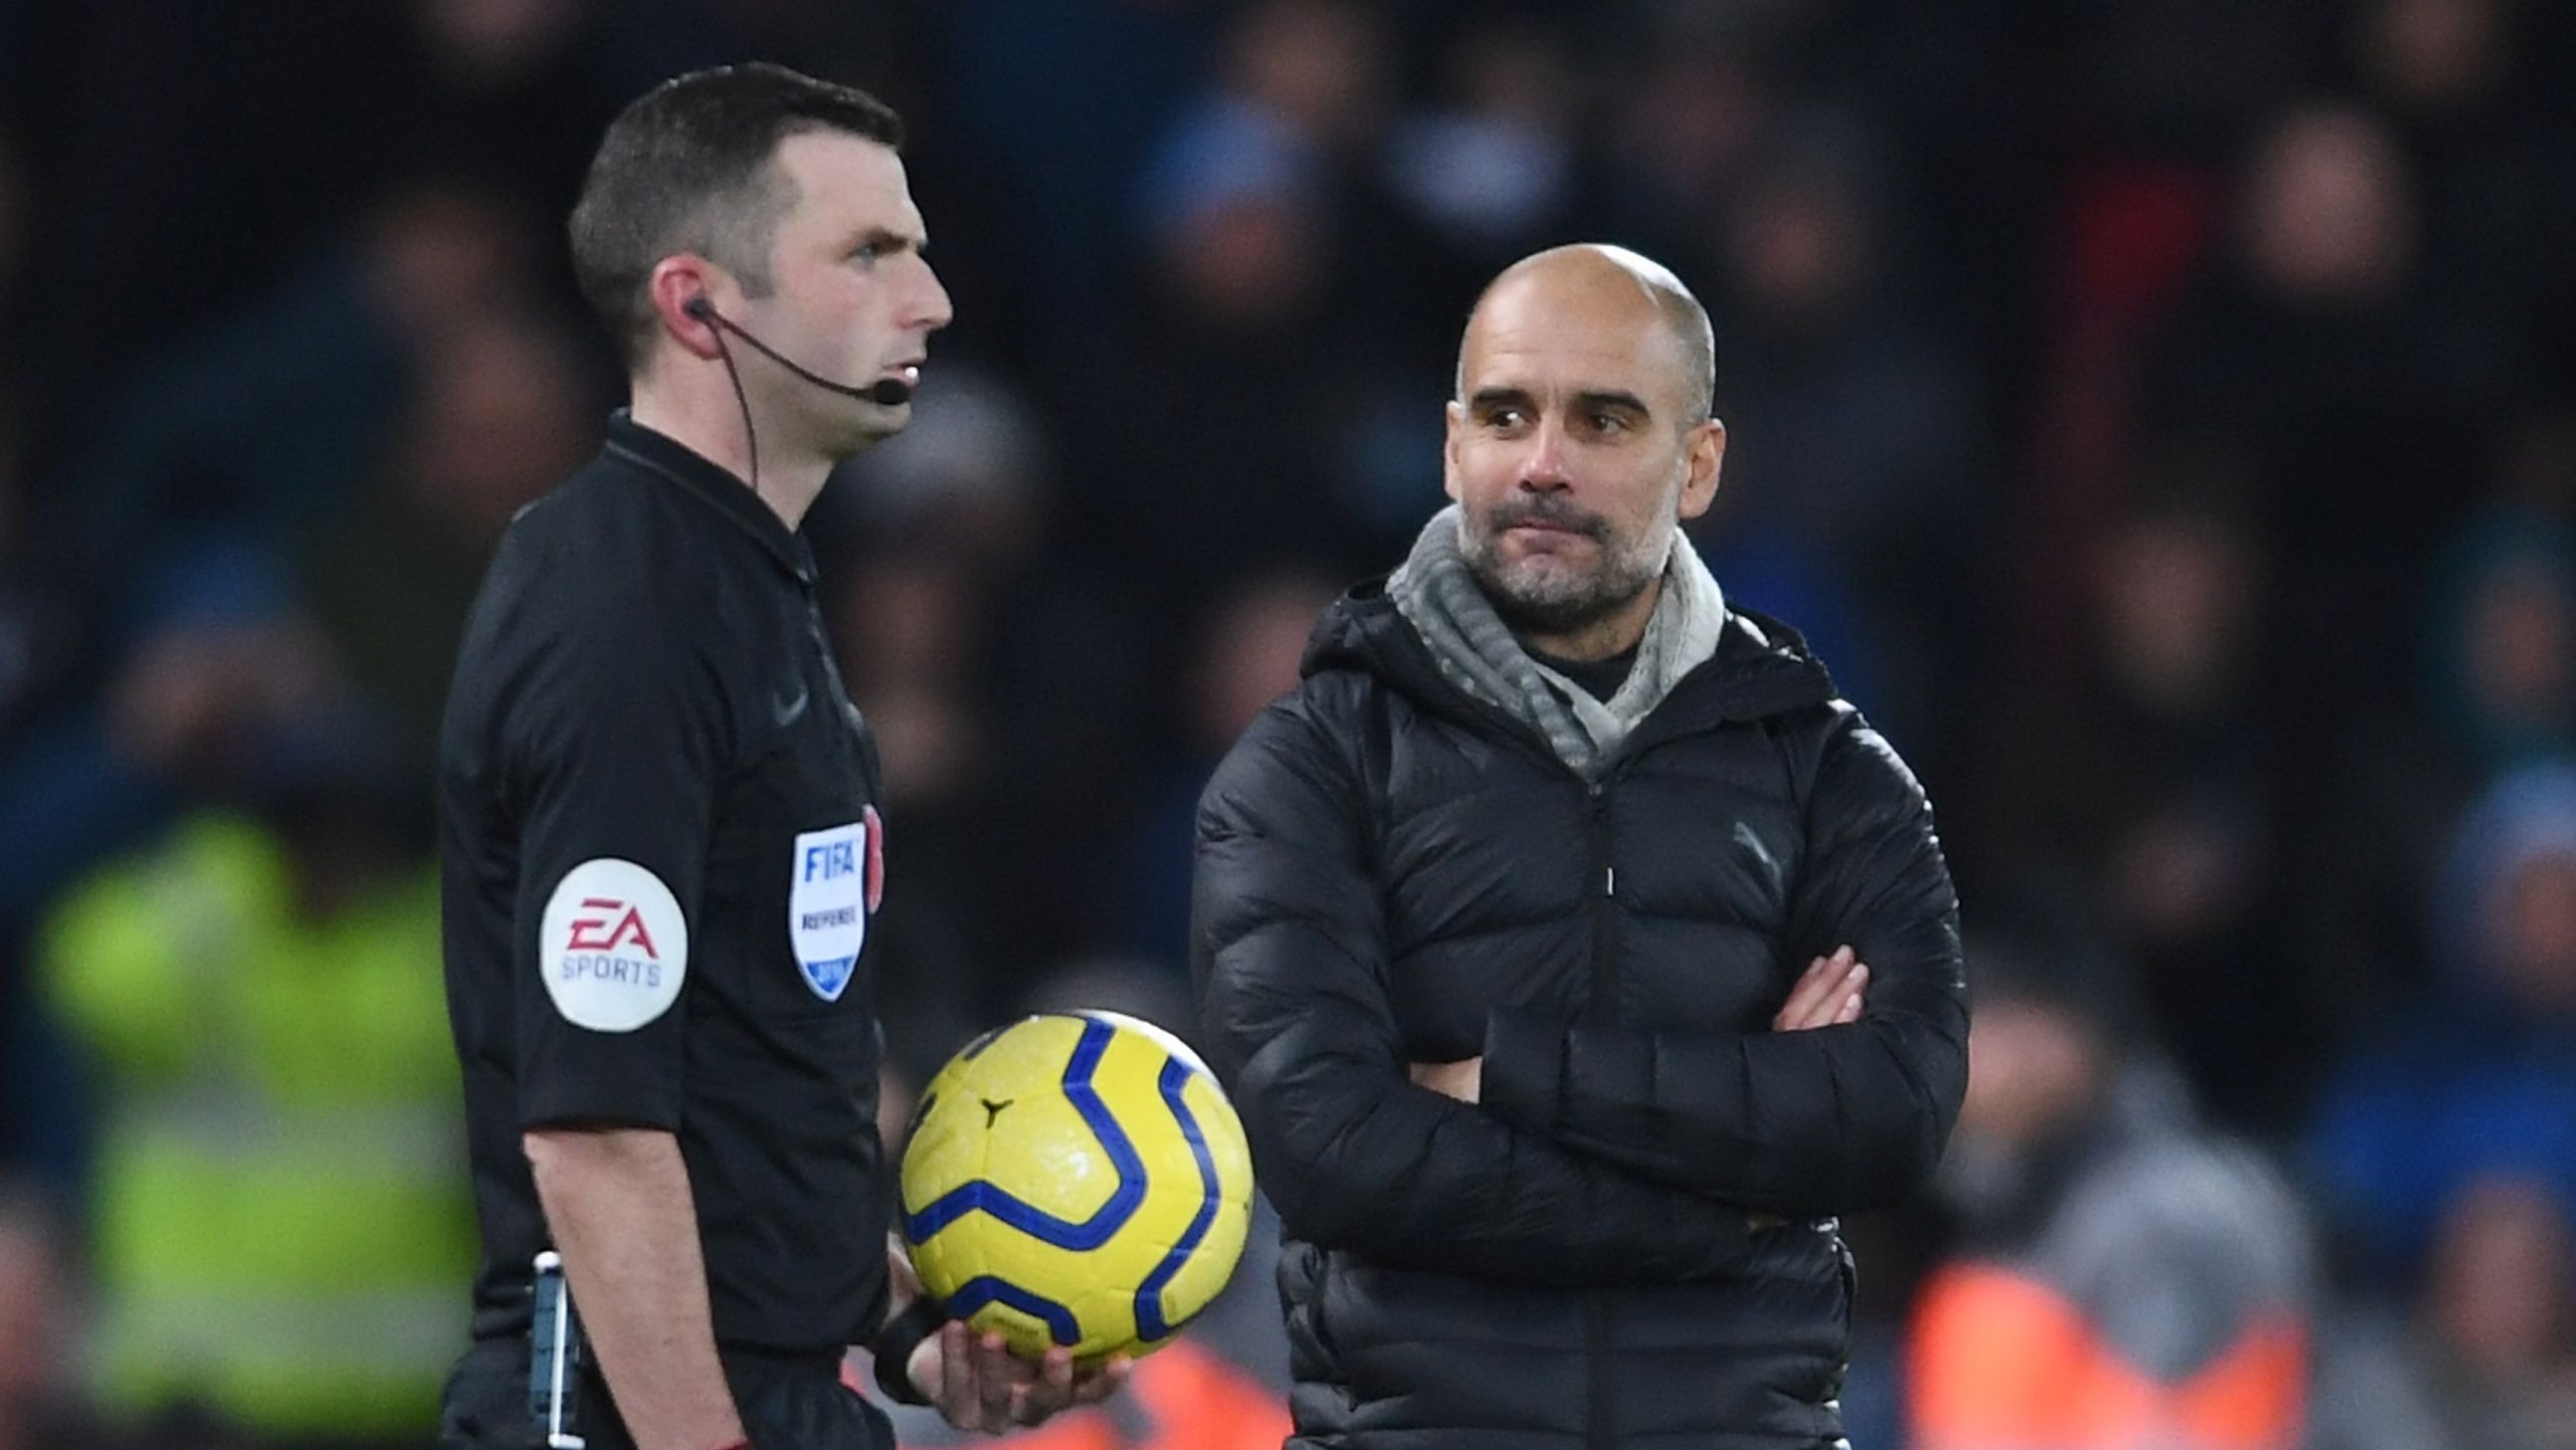 Man City boss Pep Guardiola confronted referee Michael Oliver after defeat at Liverpool